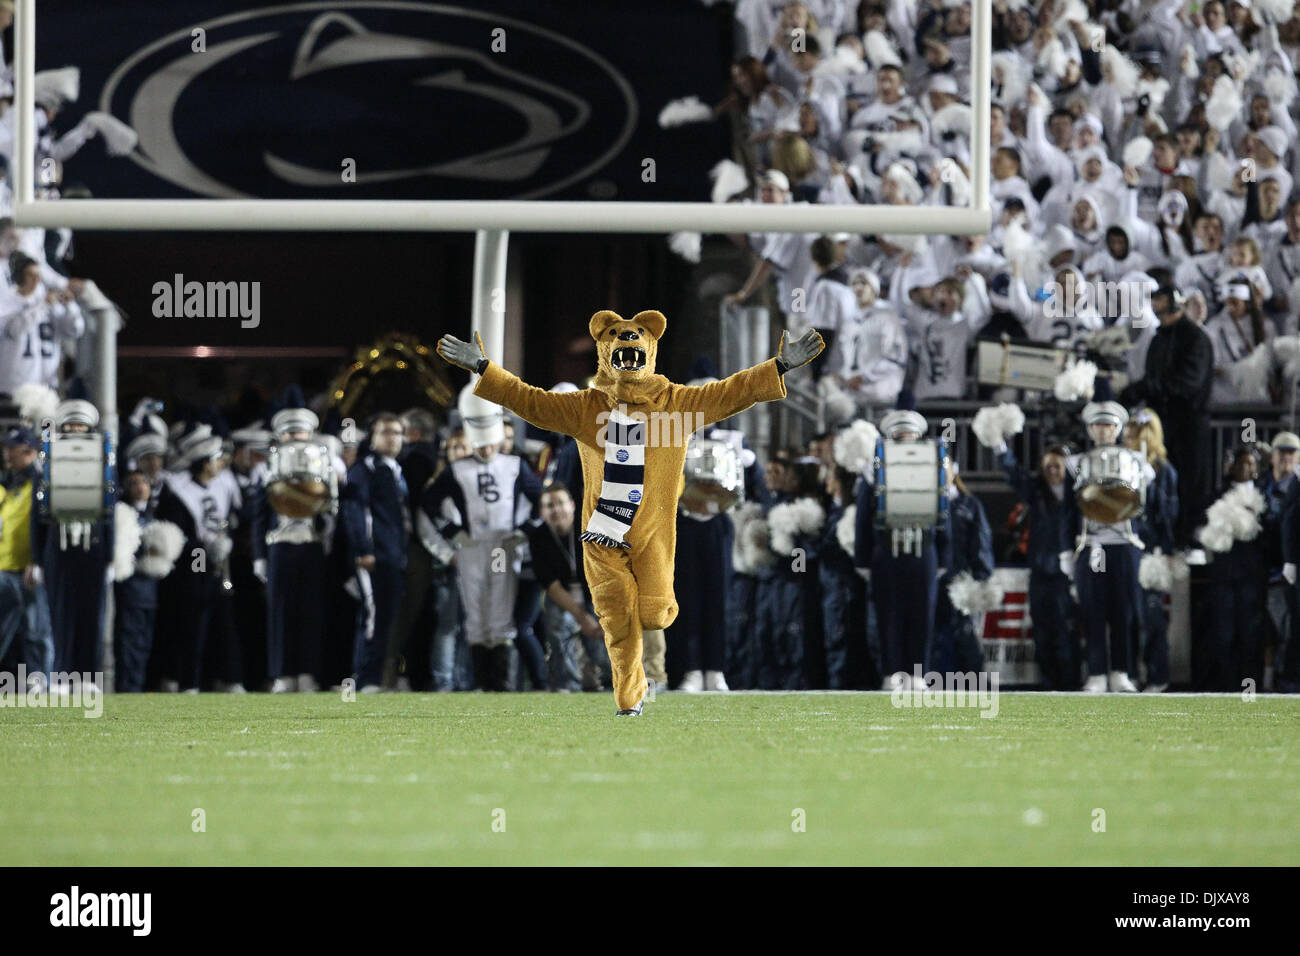 Oct. 30, 2010 - State College, Pennsylvania, United States of America - Penn State Nittany Lions Mascot in action in the game held at Beaver Stadium in State College, Pennsylvania.   Penn State defeated Michigan 41-31 (Credit Image: © Alex Cena/Southcreek Global/ZUMApress.com) Stock Photo